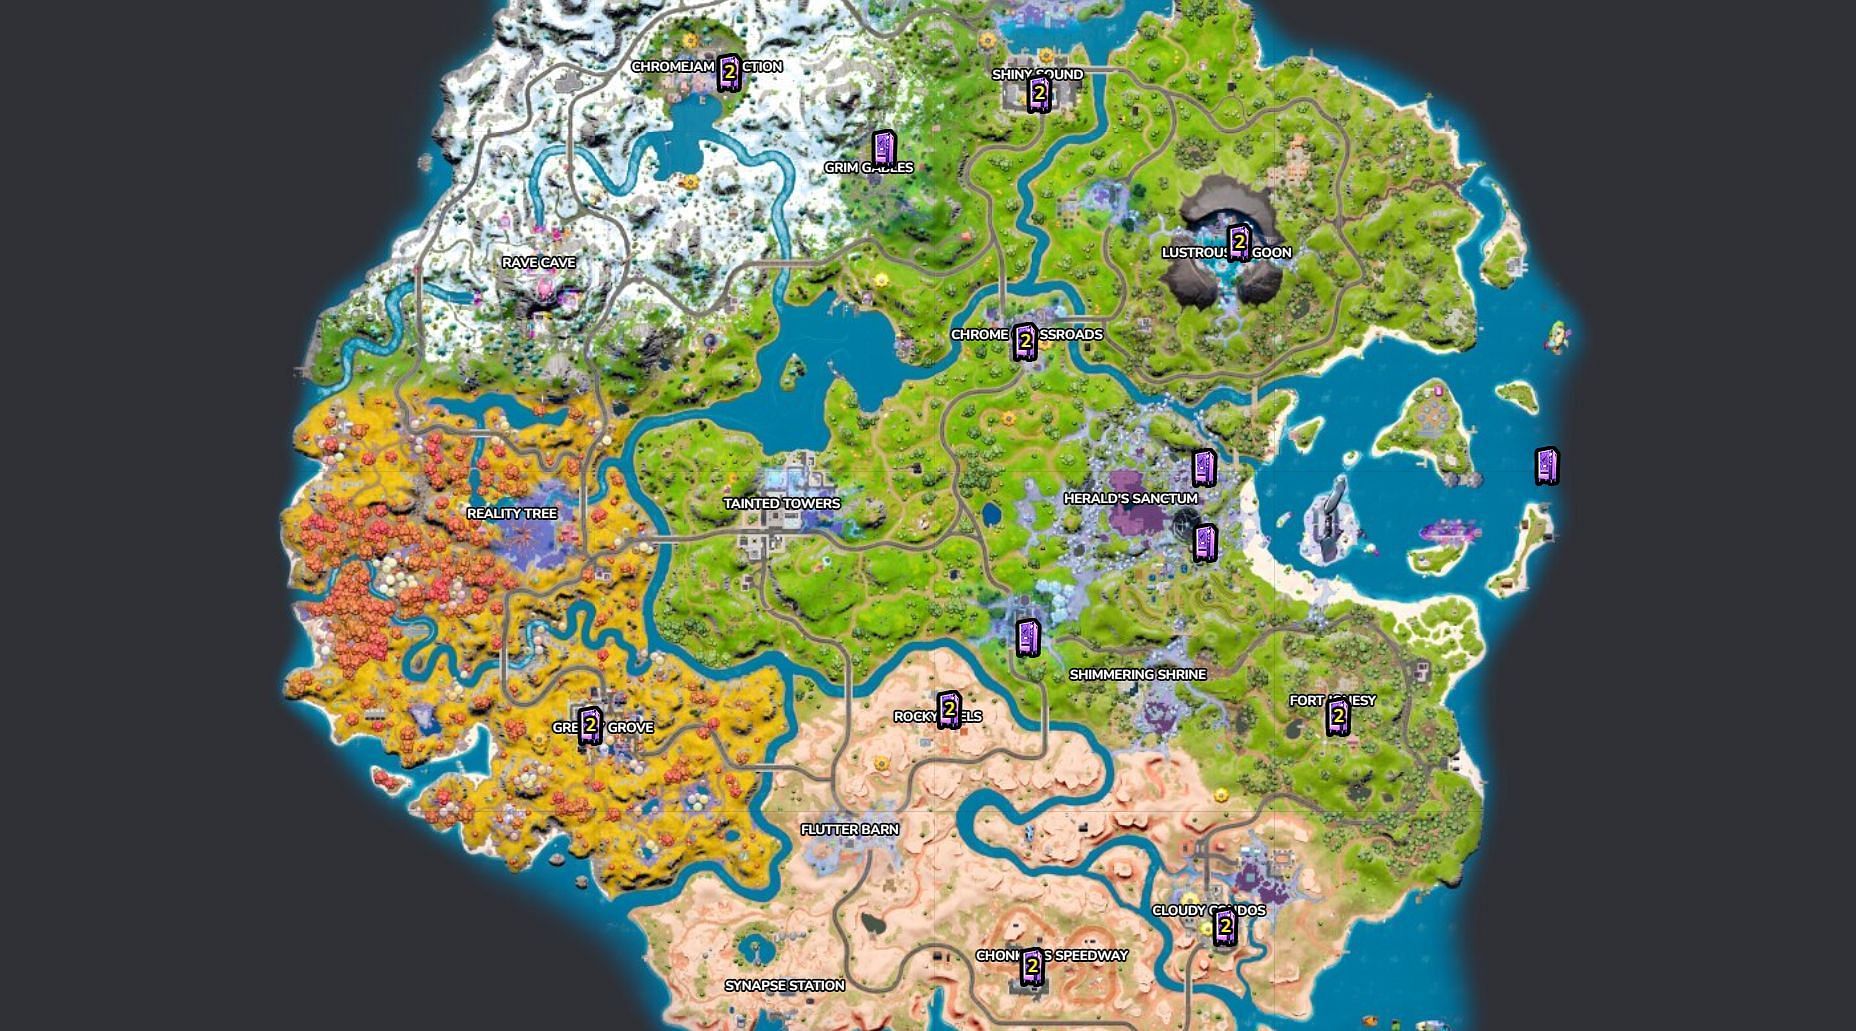 All Weapon-O-Matic locations in Chapter 4 Season 3 (Image via Fortnite.GG)